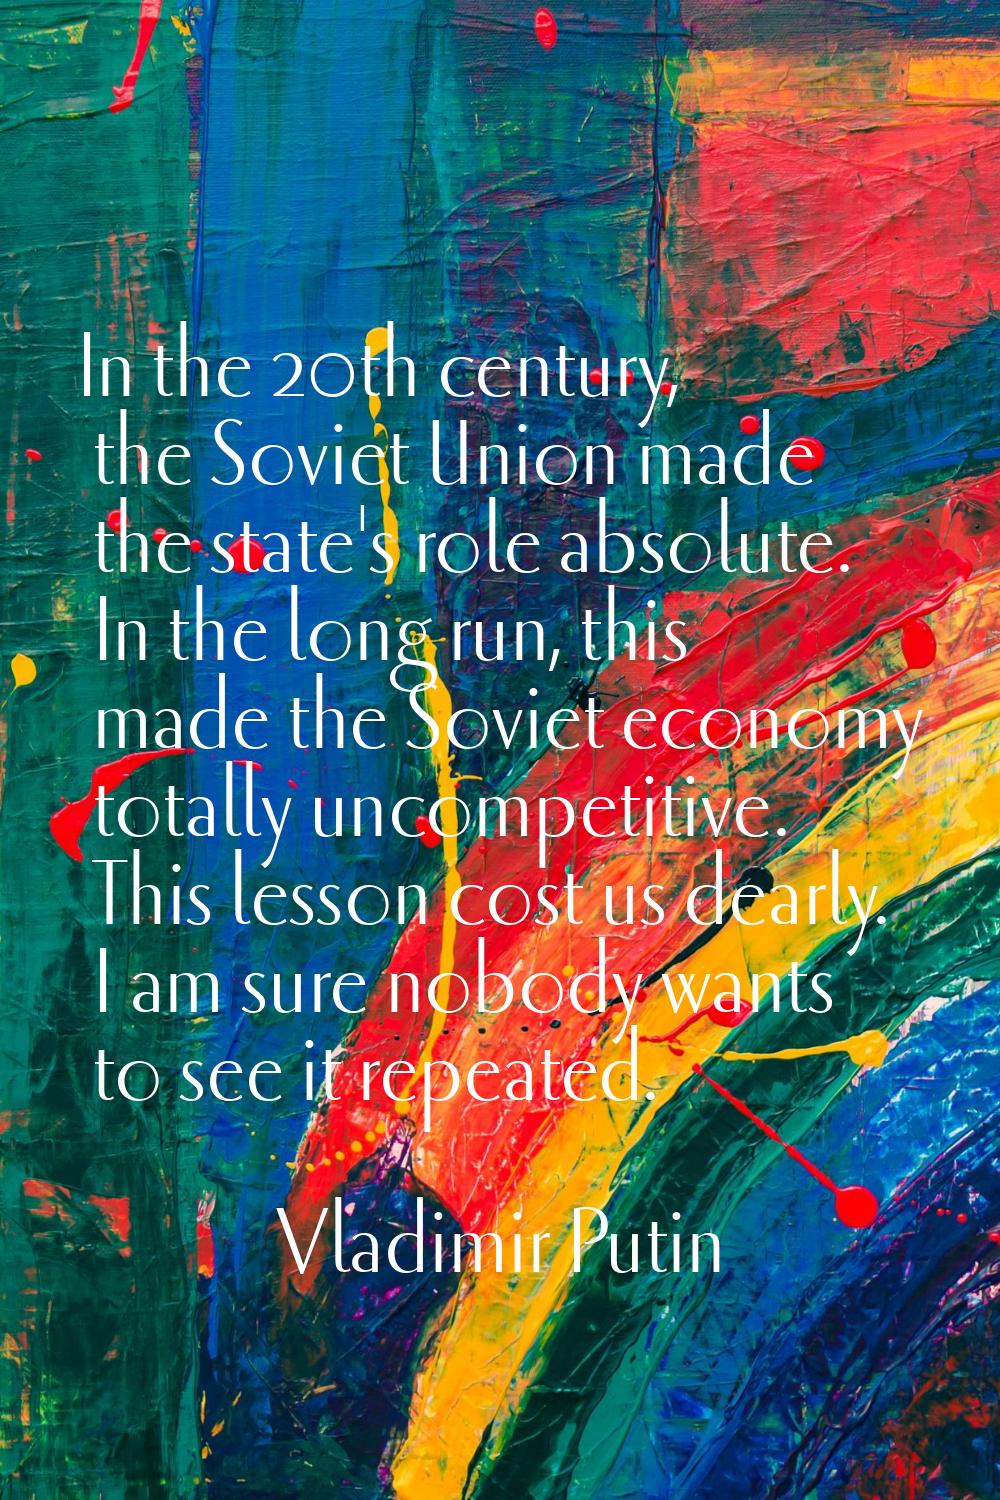 In the 20th century, the Soviet Union made the state's role absolute. In the long run, this made th